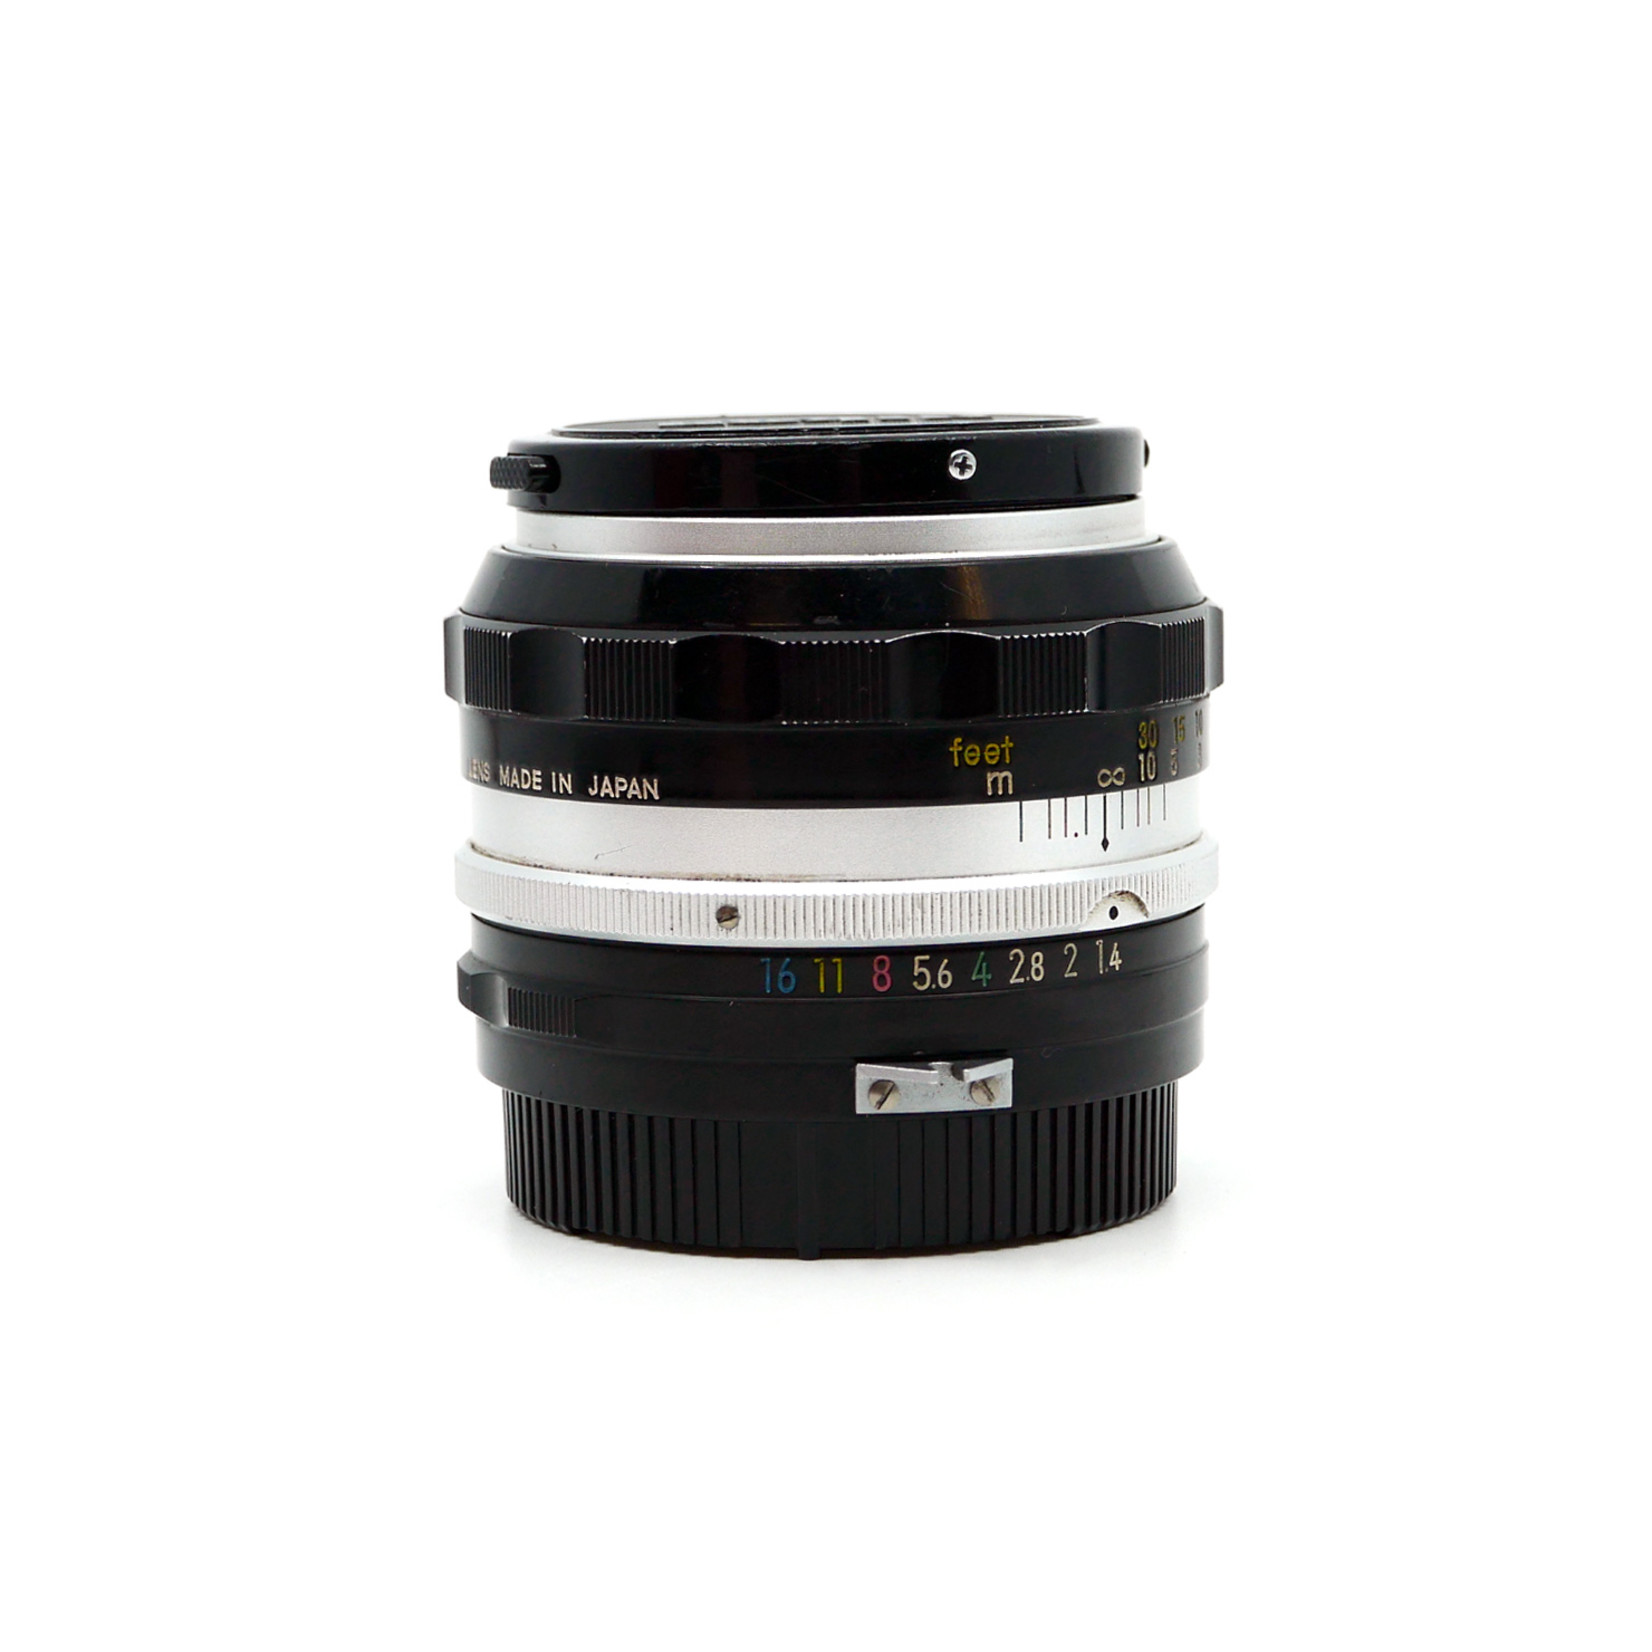 Nikkor Nikkor-S 50mm f/1.4 Non-Ai (Used)